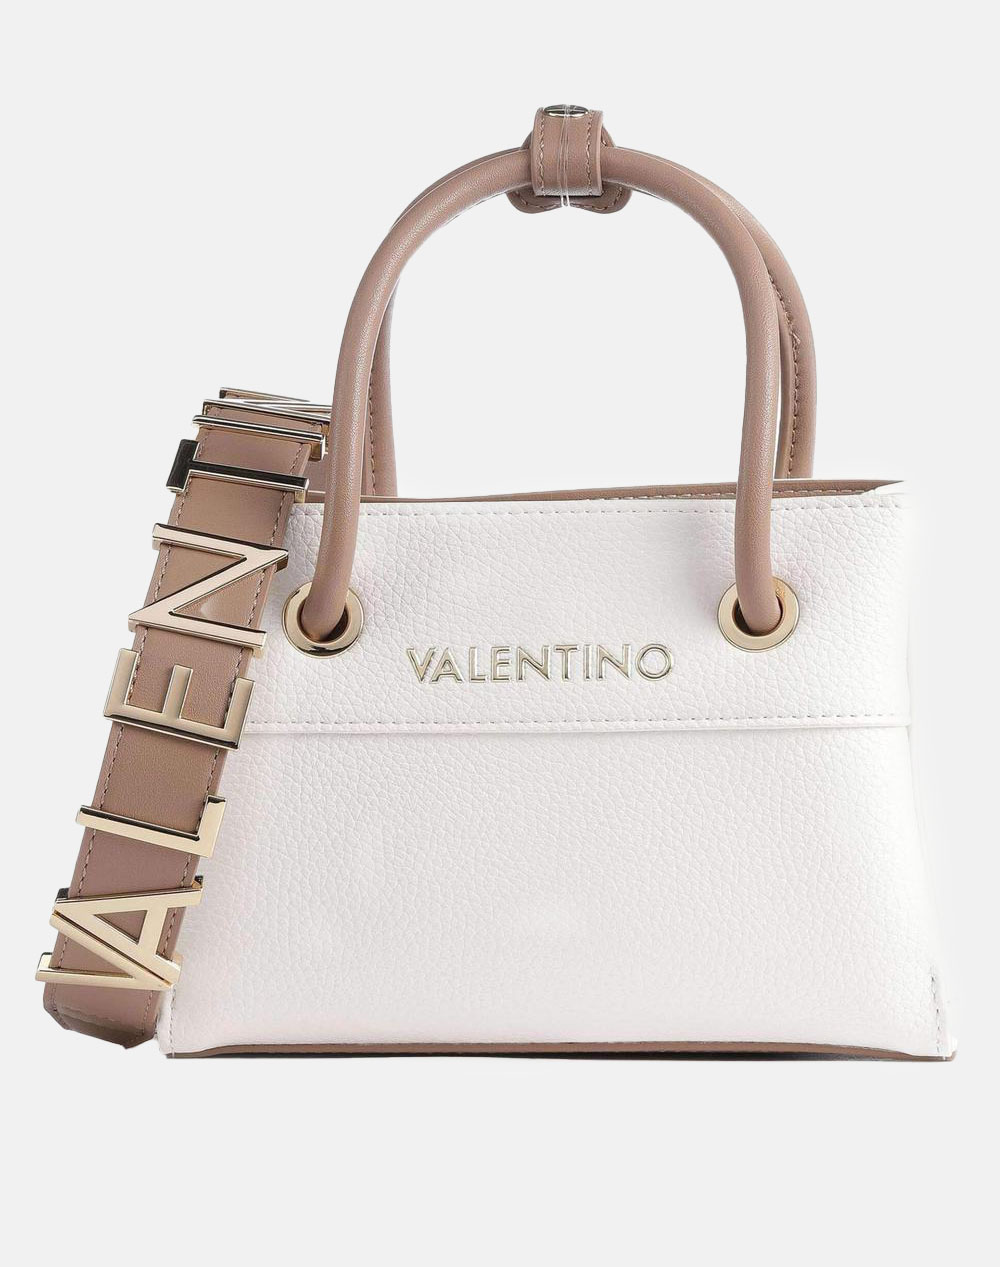 VALENTINO BAGS ΤΣΑΝΤΕΣ ΧΕΙΡΟΣ S61680169970-970 OffWhite 3810PT-VA6200107_XR20303